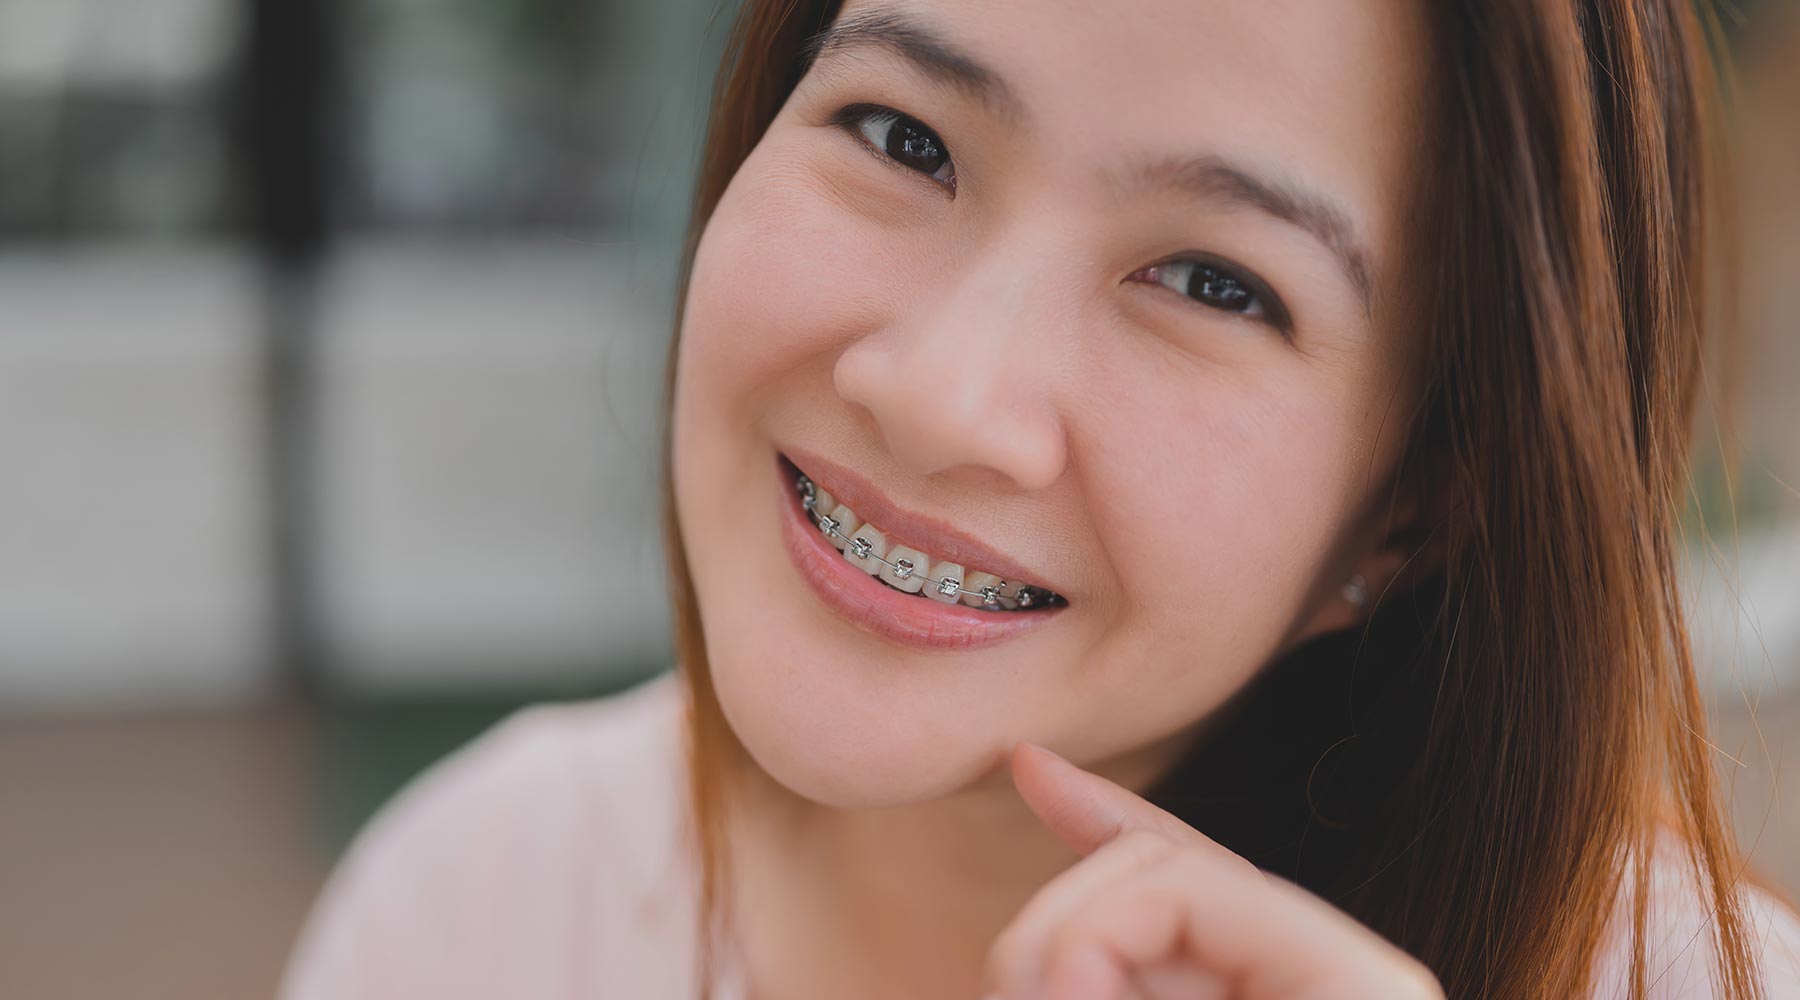 Permanent retainer costs after braces